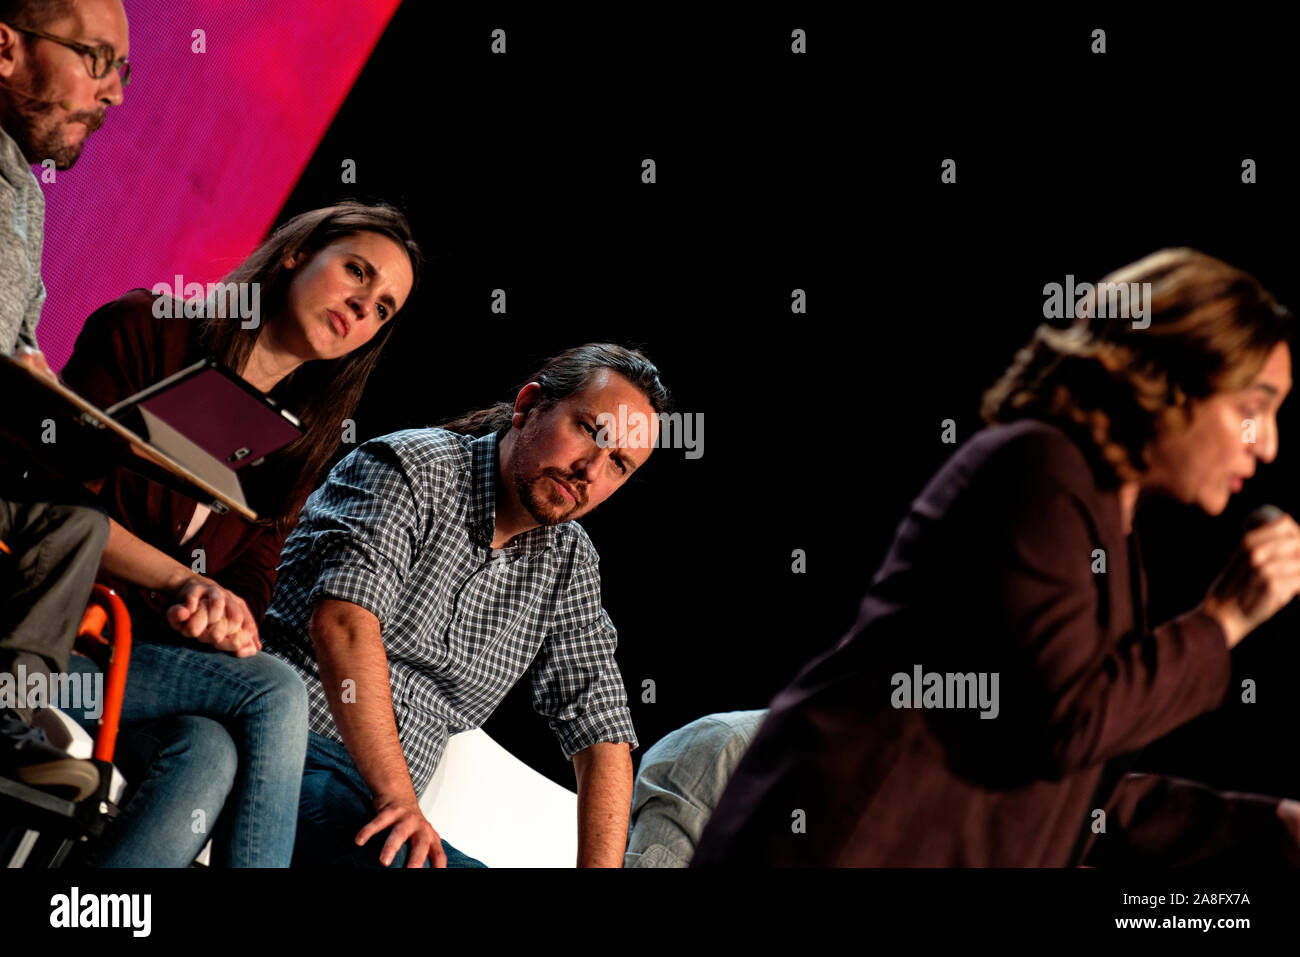 IFEMA, Madrid, Spain. 08th November, 2019. L to  R Pablo Echenique, candidate of Unidas Podemos to the Congress of Deputies for Zaragoza, Irene Montero, spokesperson for Unidas Podemos in the Congress of Deputies and candidate for Madrid, Pablo Iglesias, secretary general of Podemos and candidate of Unidas Podemos for the Presidency of the Government, Ada Colau, mayor of Barcelona, at the last event of Unidas Podemos party before the campaign closure for the General Elections in Spain. Credit: EnriquePSans/Alamy Live News Stock Photo